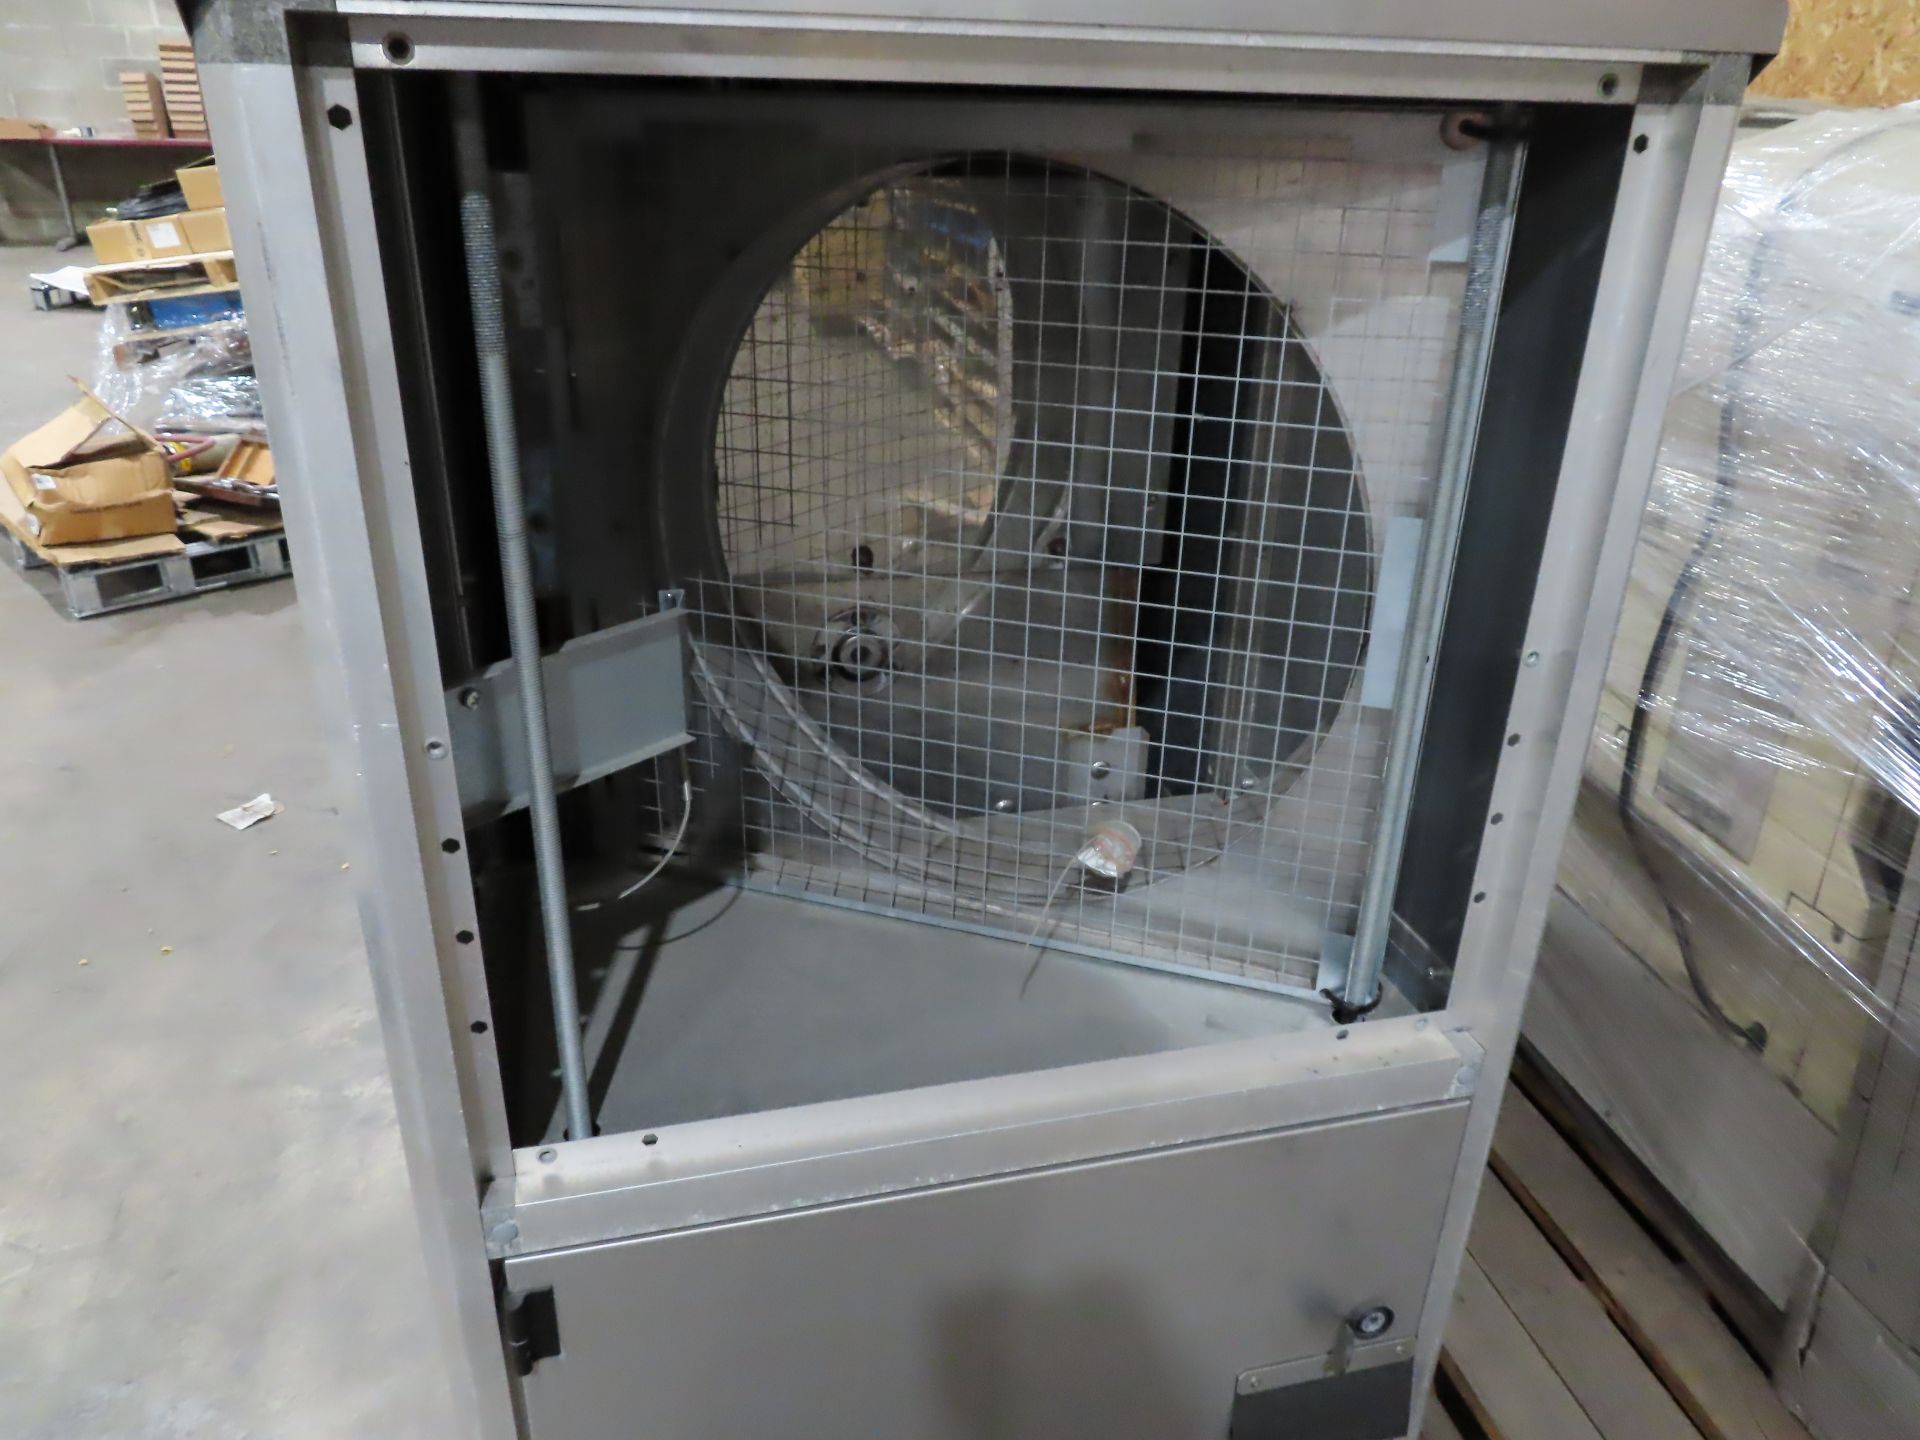 Thermobile Model IMAC-2000SG construction heater, 650,000btu, new old stock with zero hours, as - Image 7 of 7